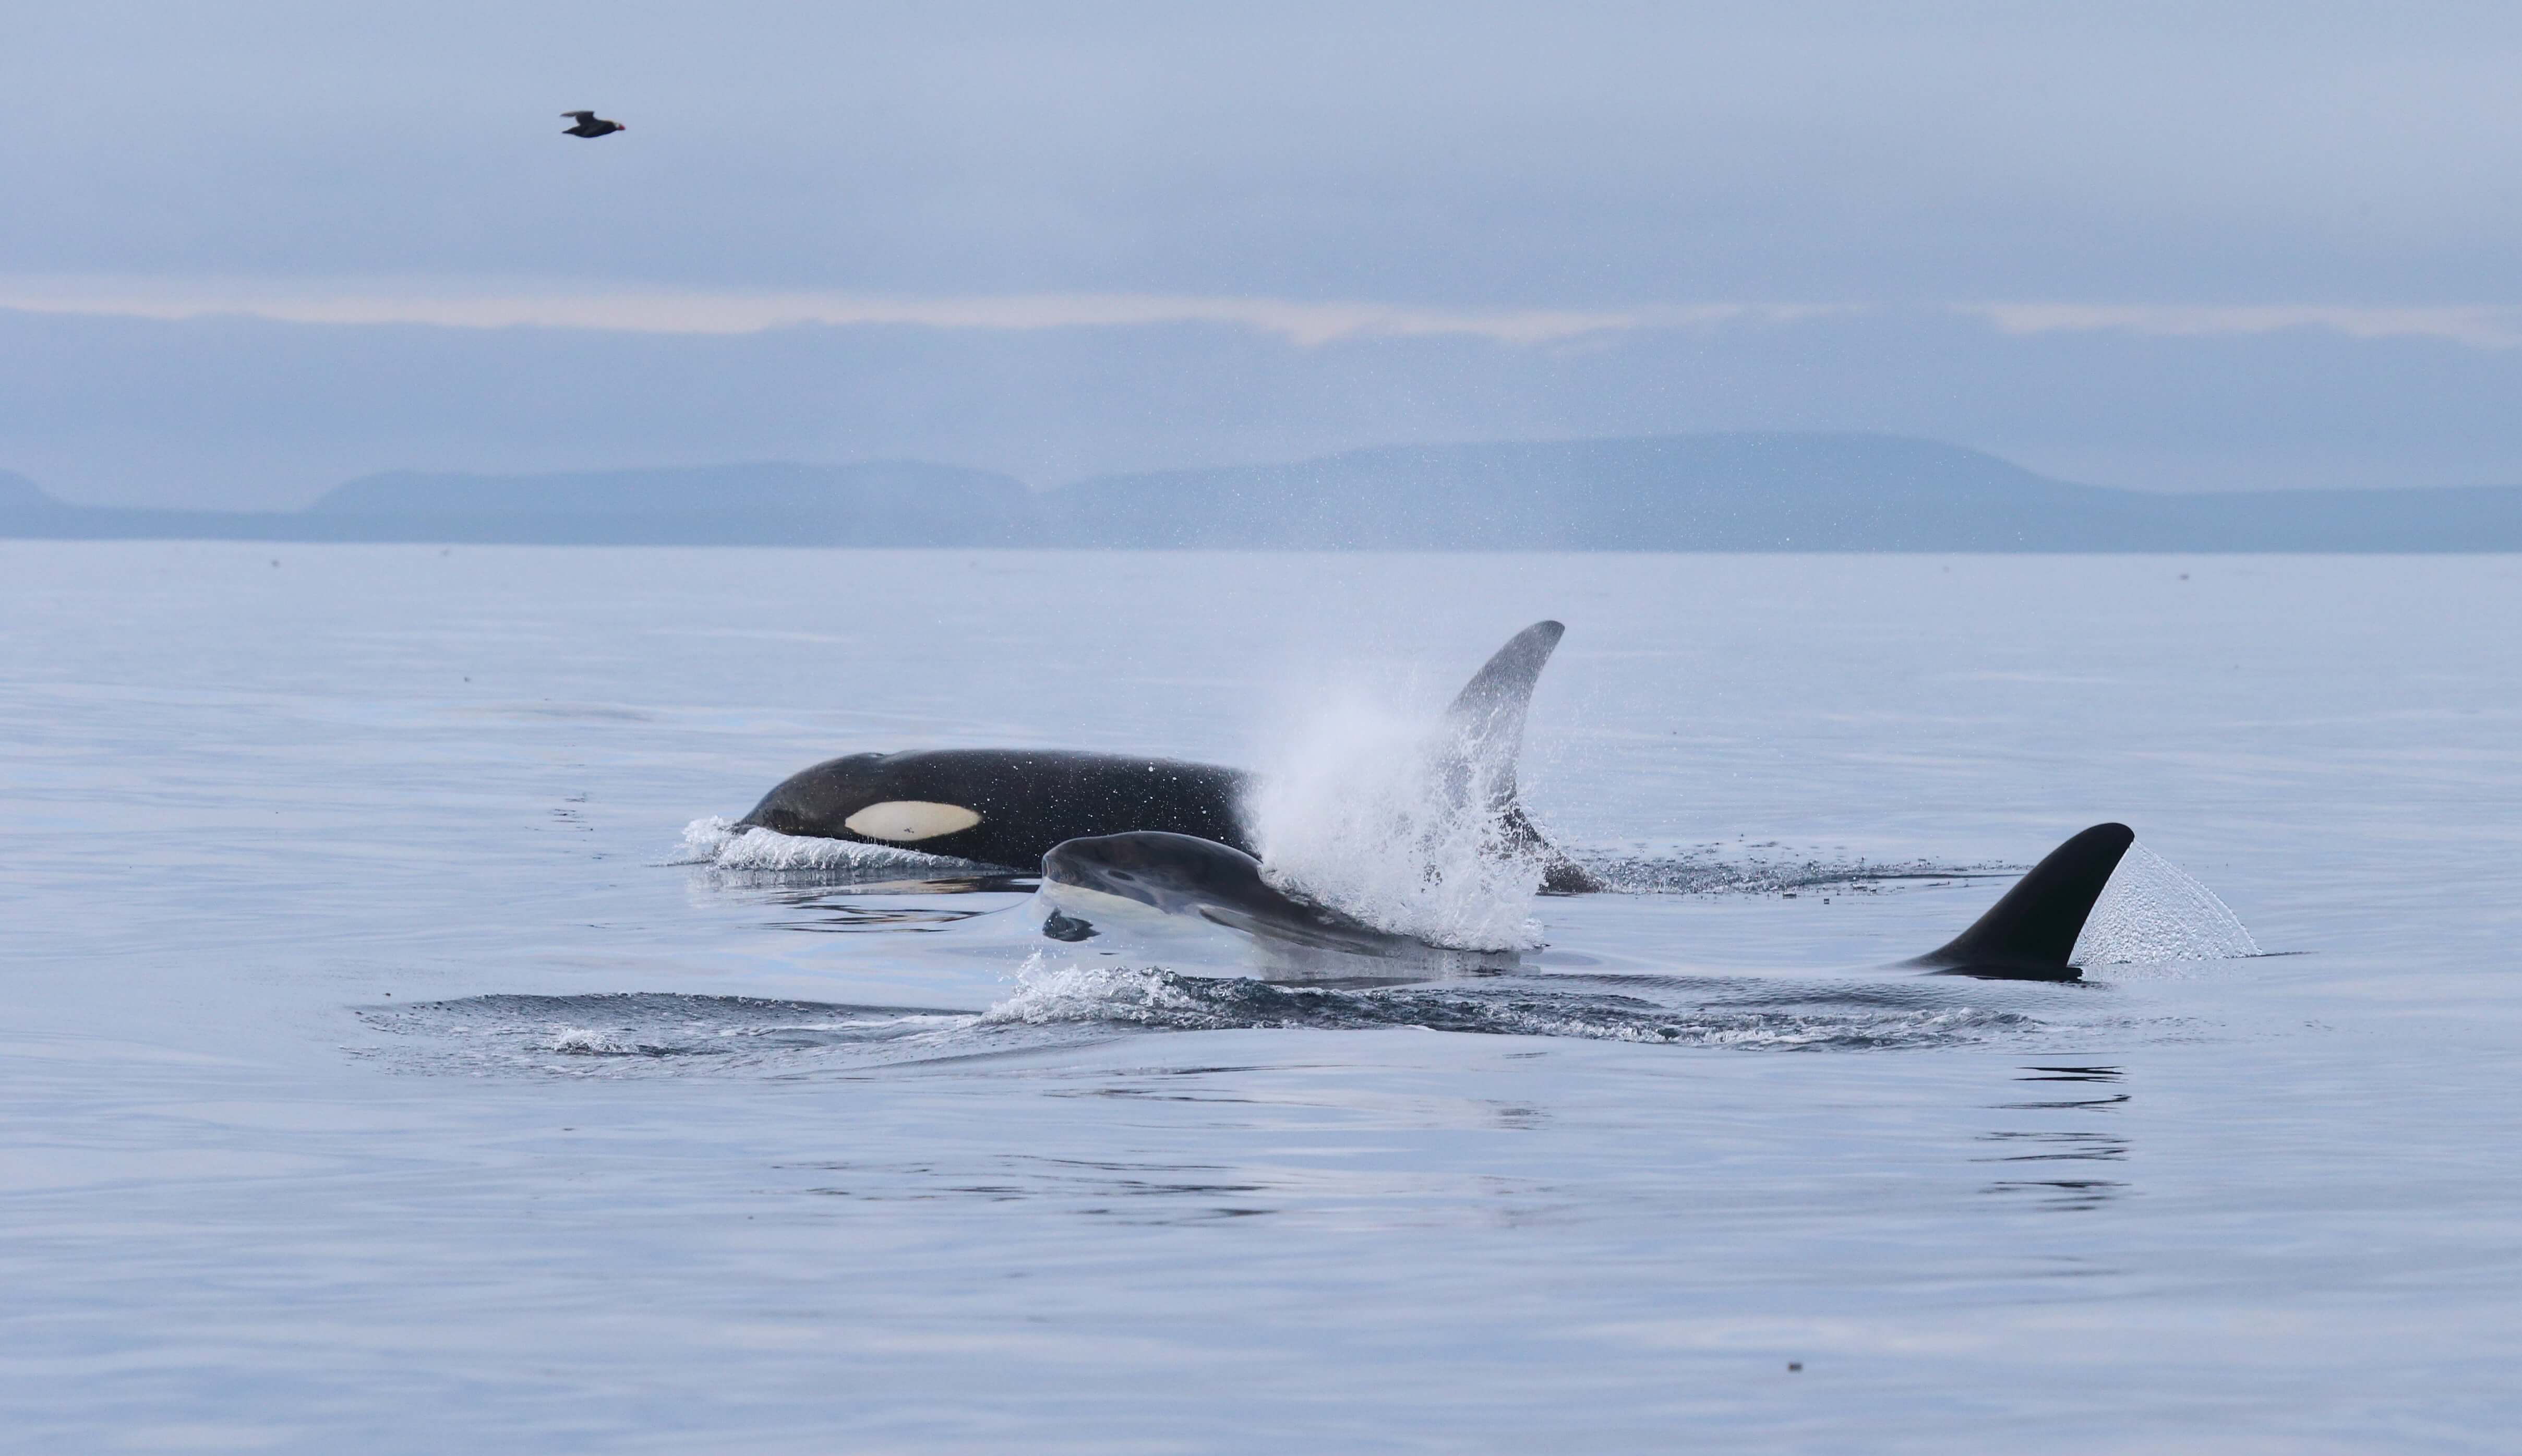 Petropavlovsk-Kamchatsky Hosts The Commander Islands Reserve Whales and Other Marine Mammals Photo Show